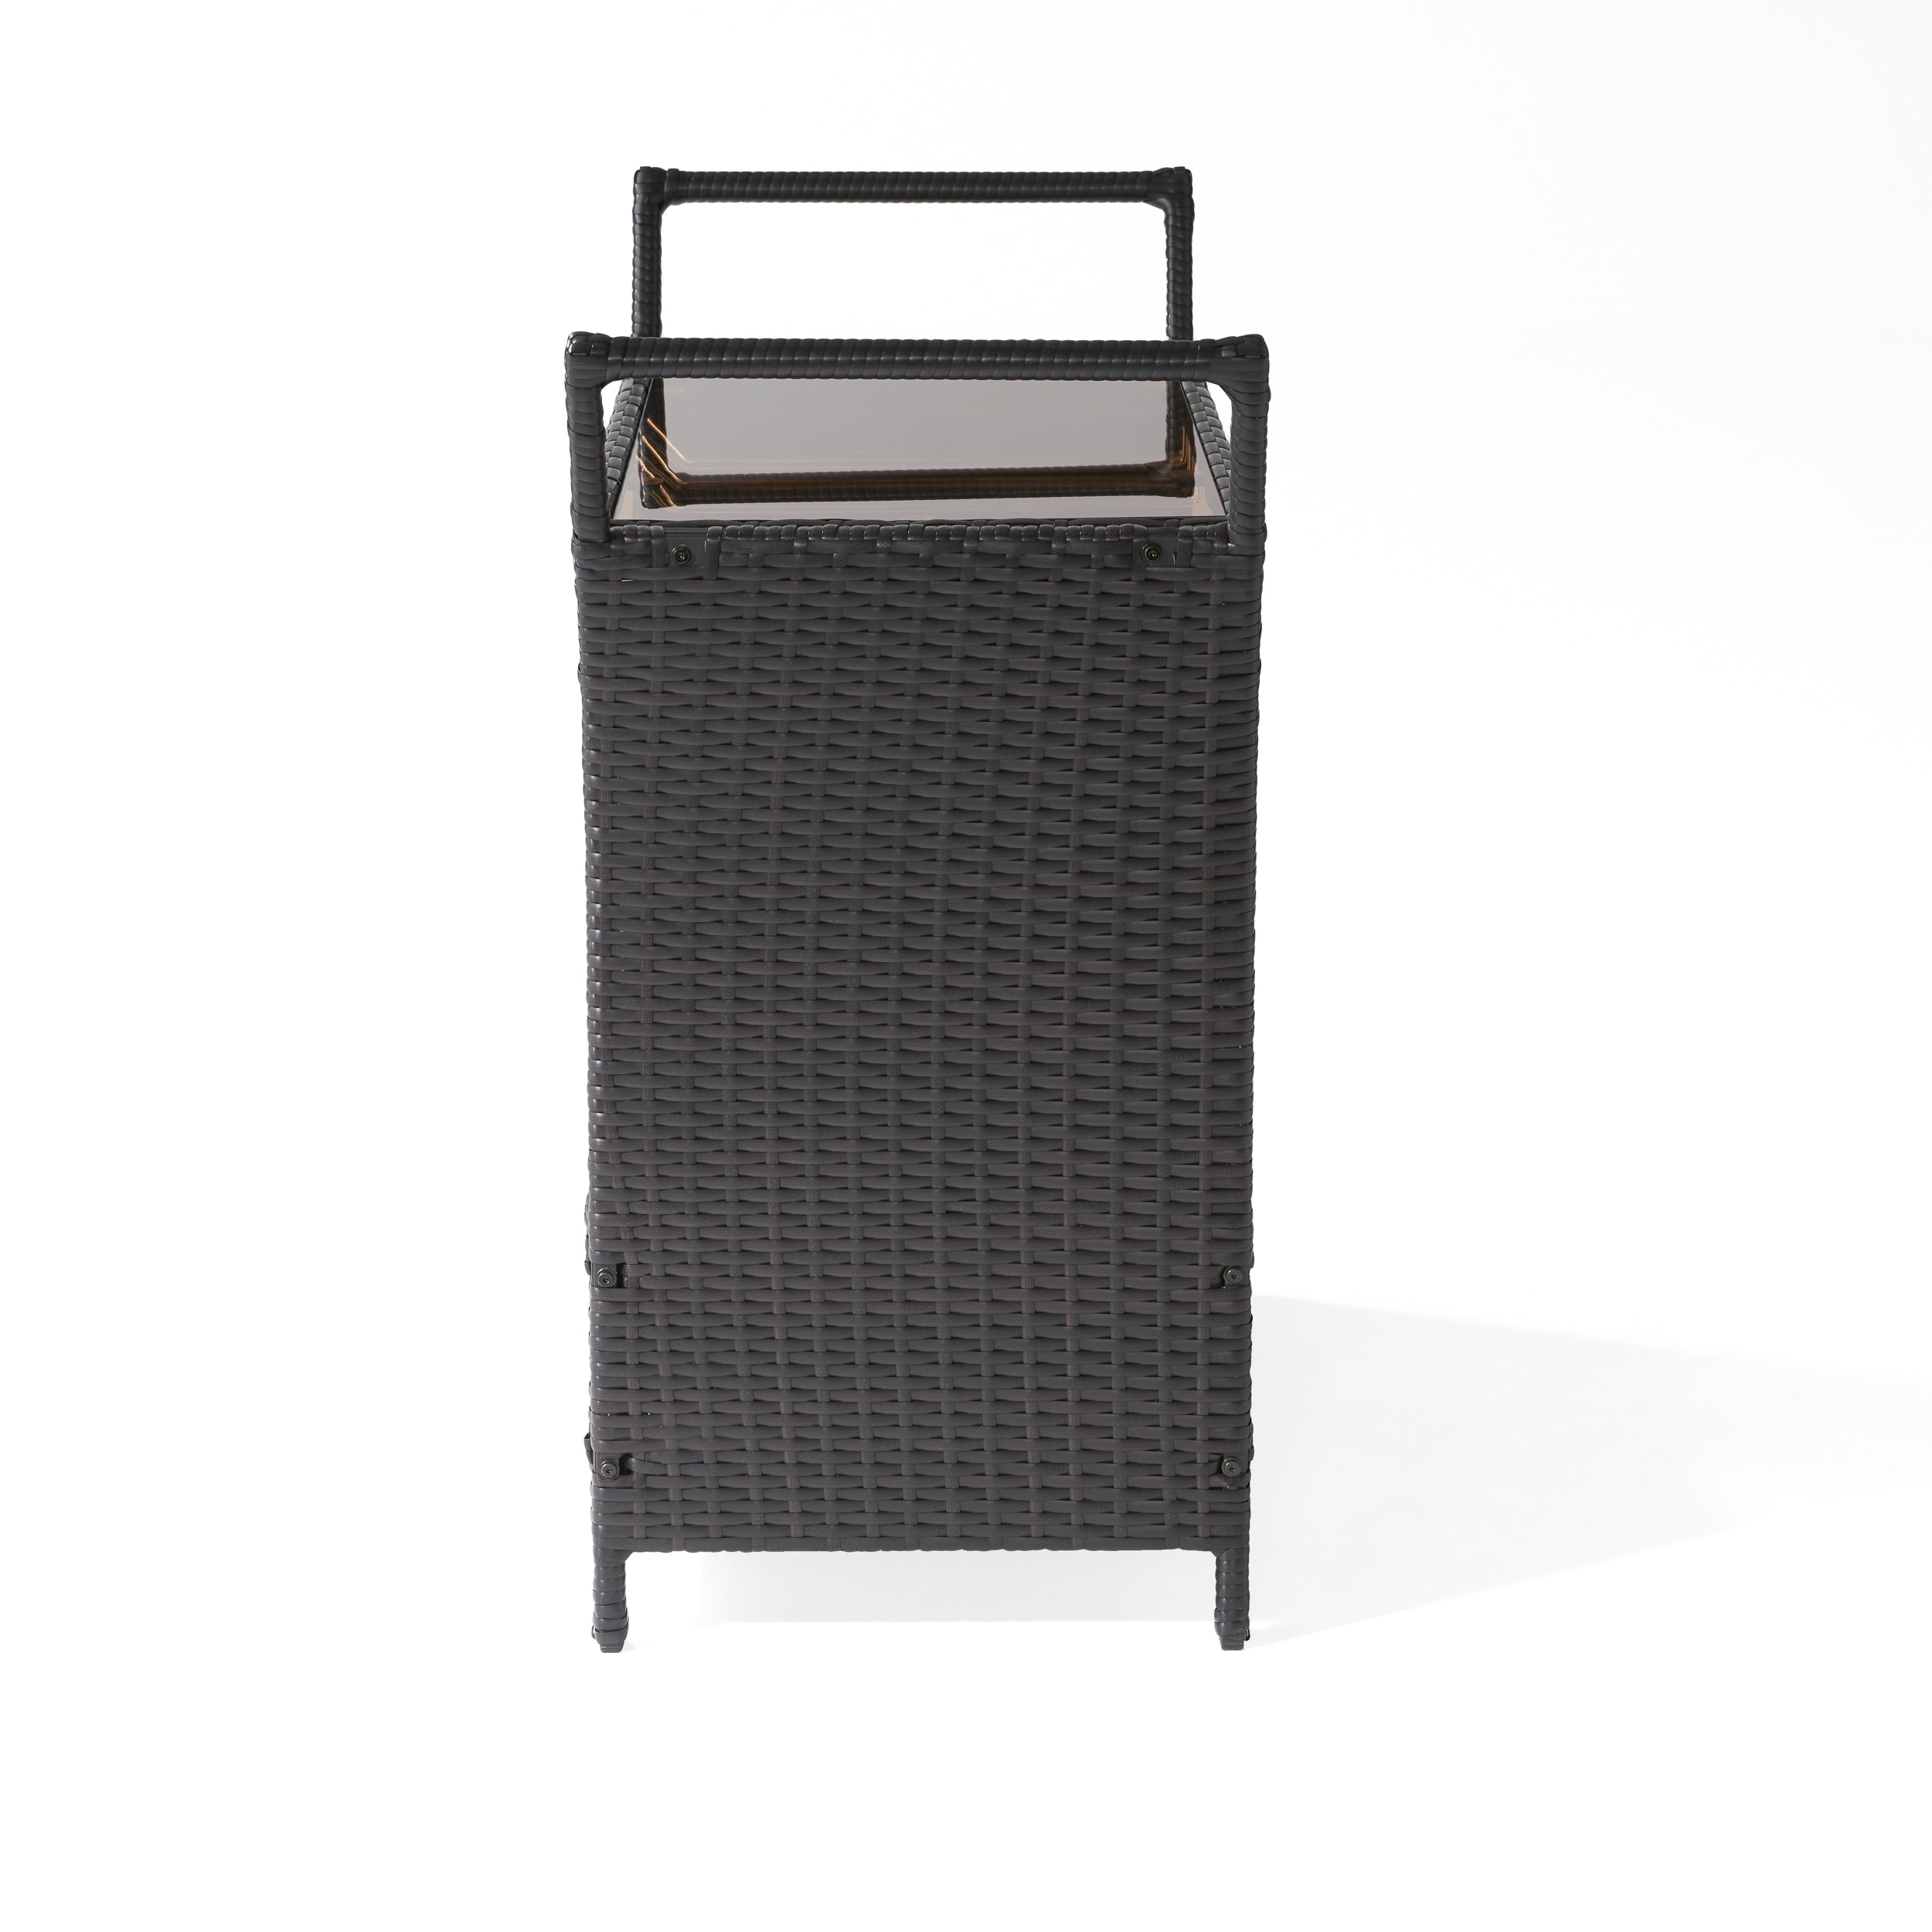 Details about   Bahama Outdoor Wicker Bar Cart with Tempered Glass Top 